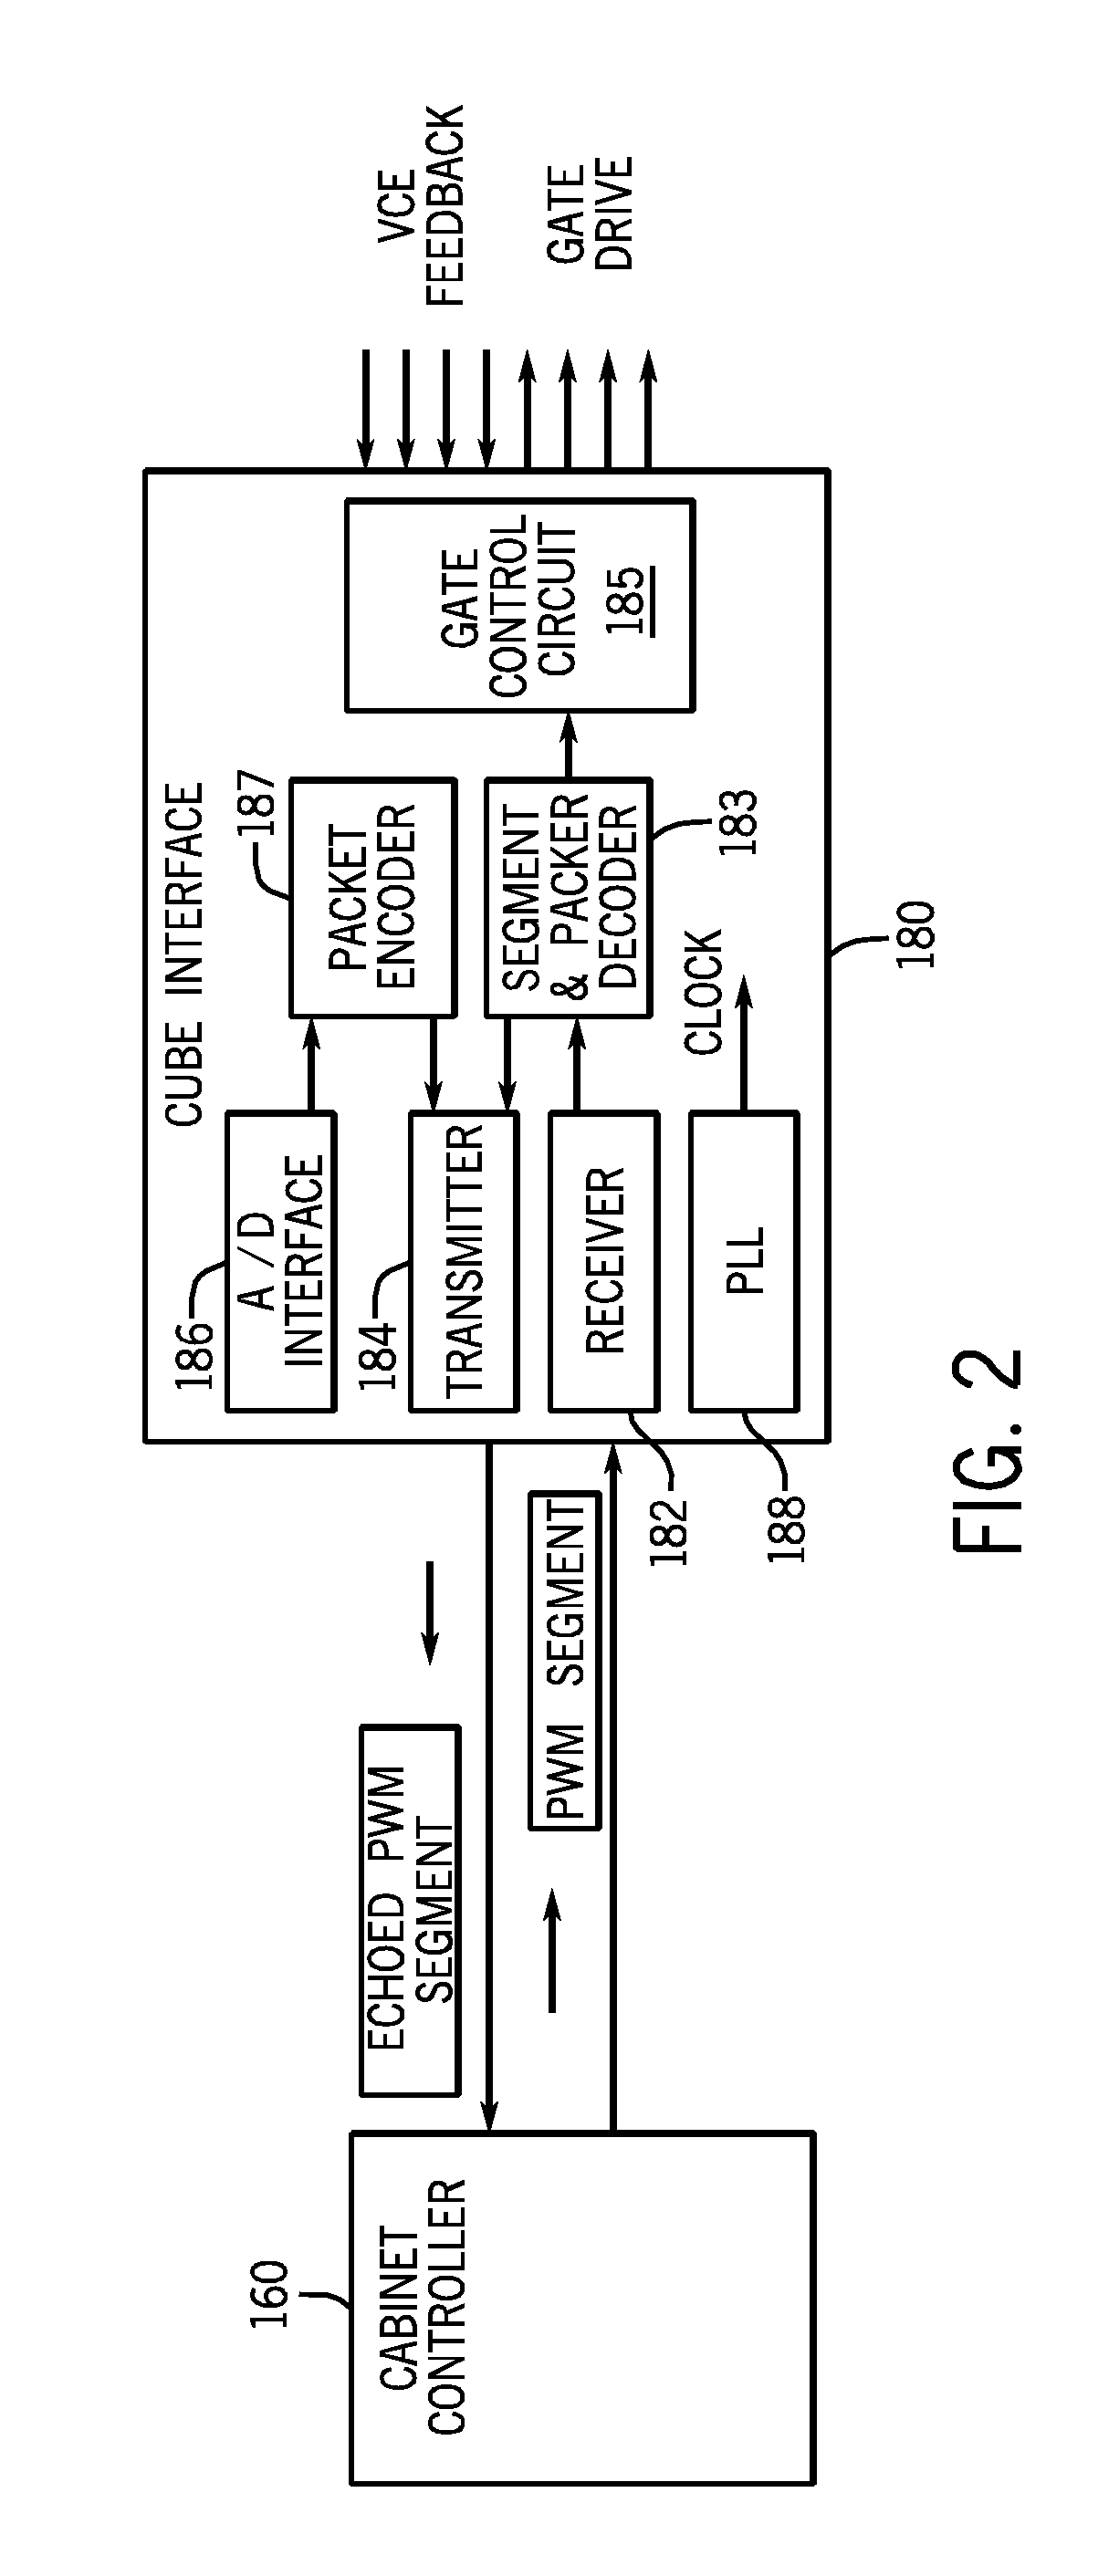 Providing Multiple Communication Protocols For A Control System